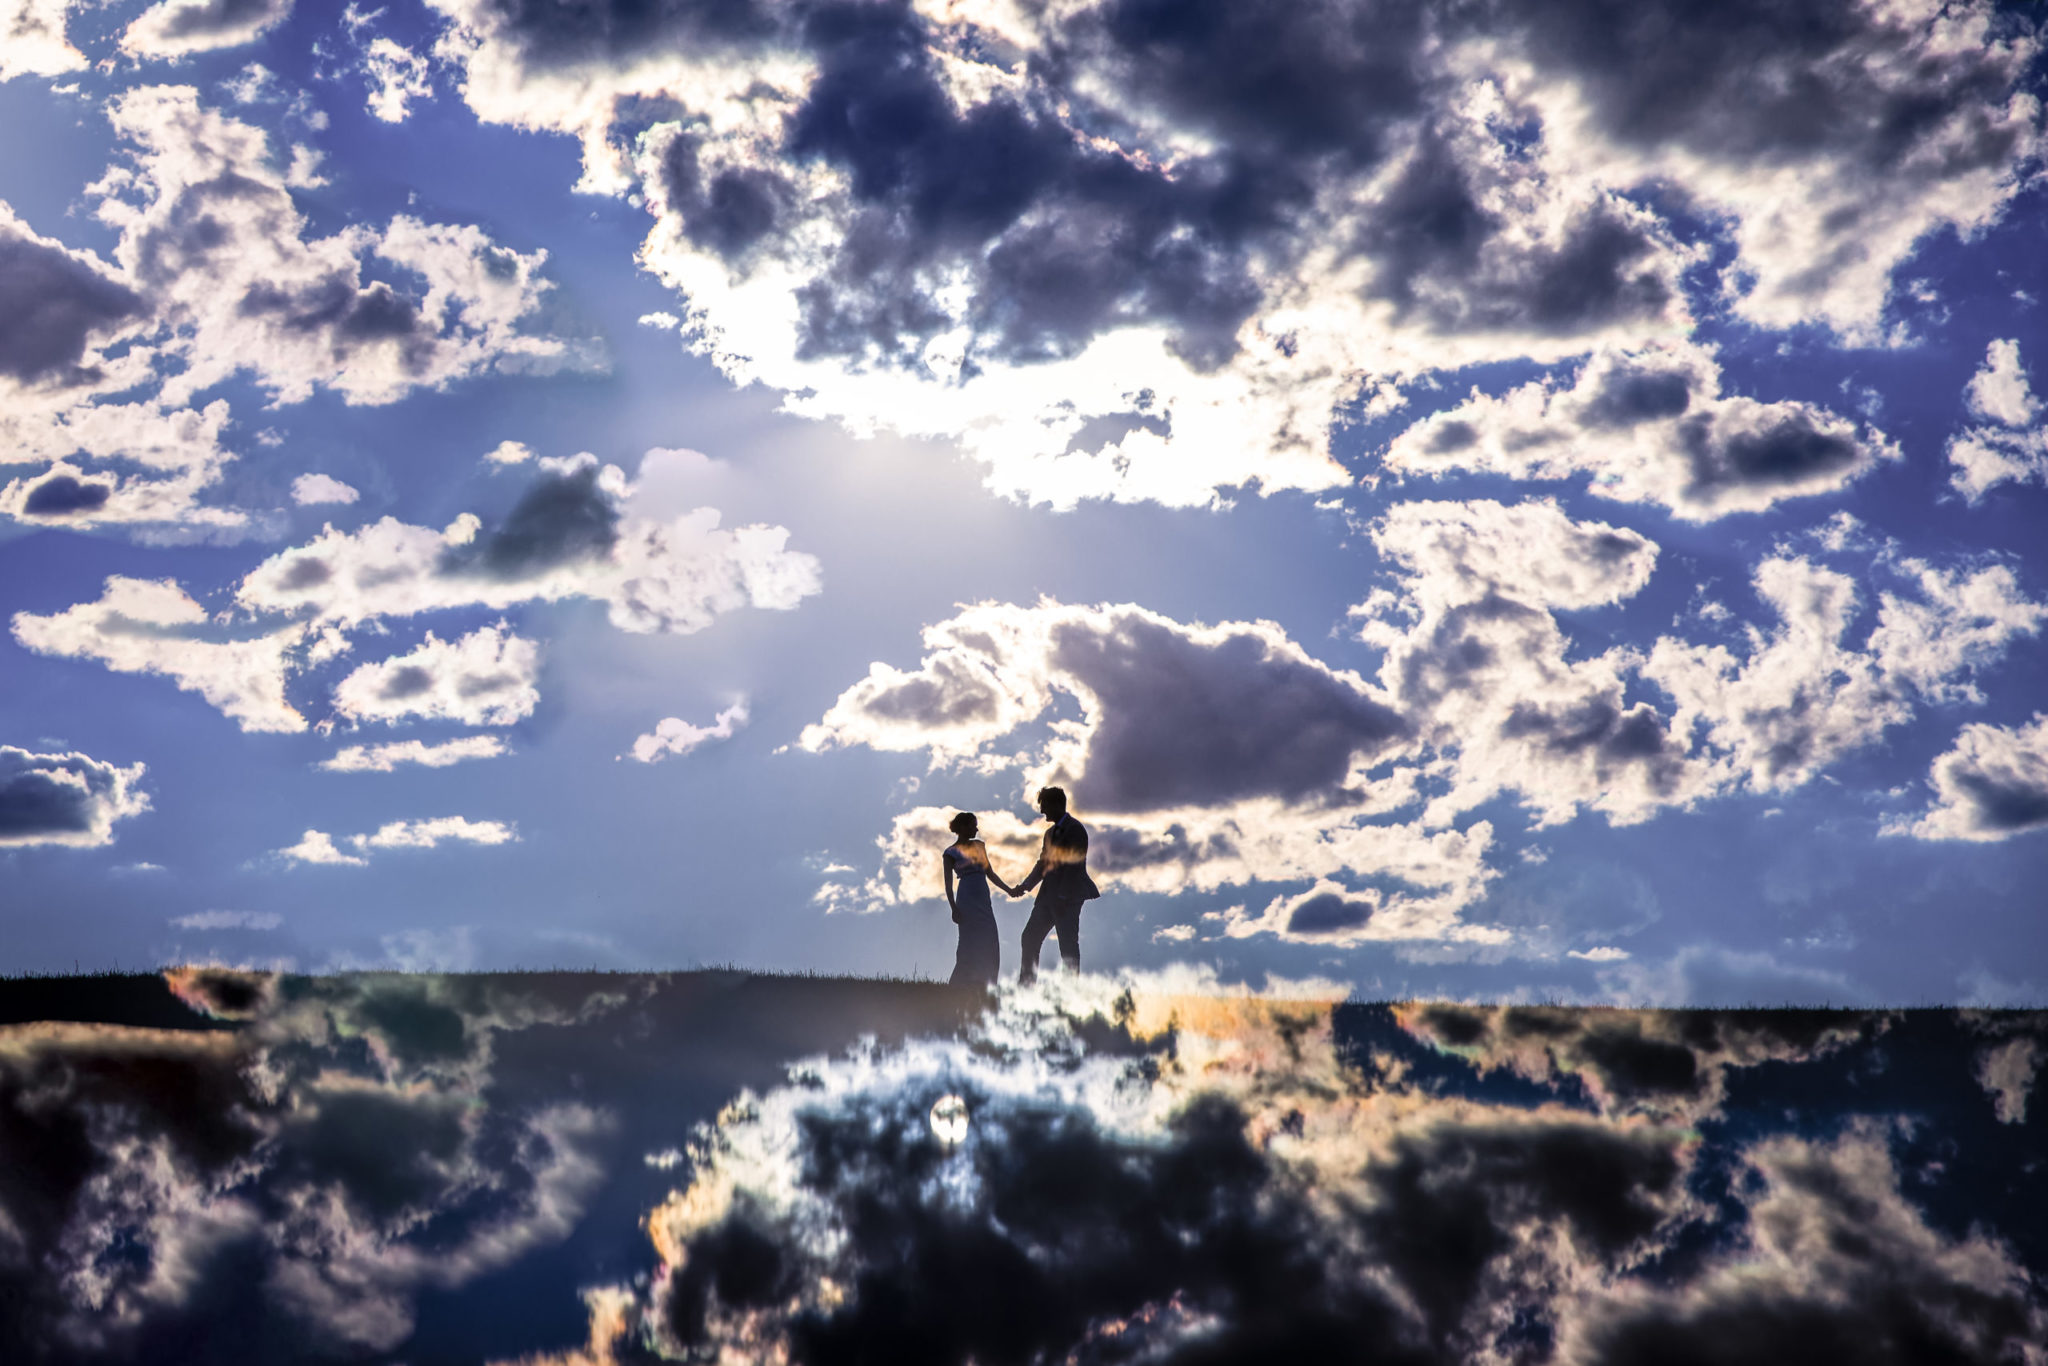 Central PA wedding photographer captures this creative, unique of a couple as they hold hands surrounded by clouds